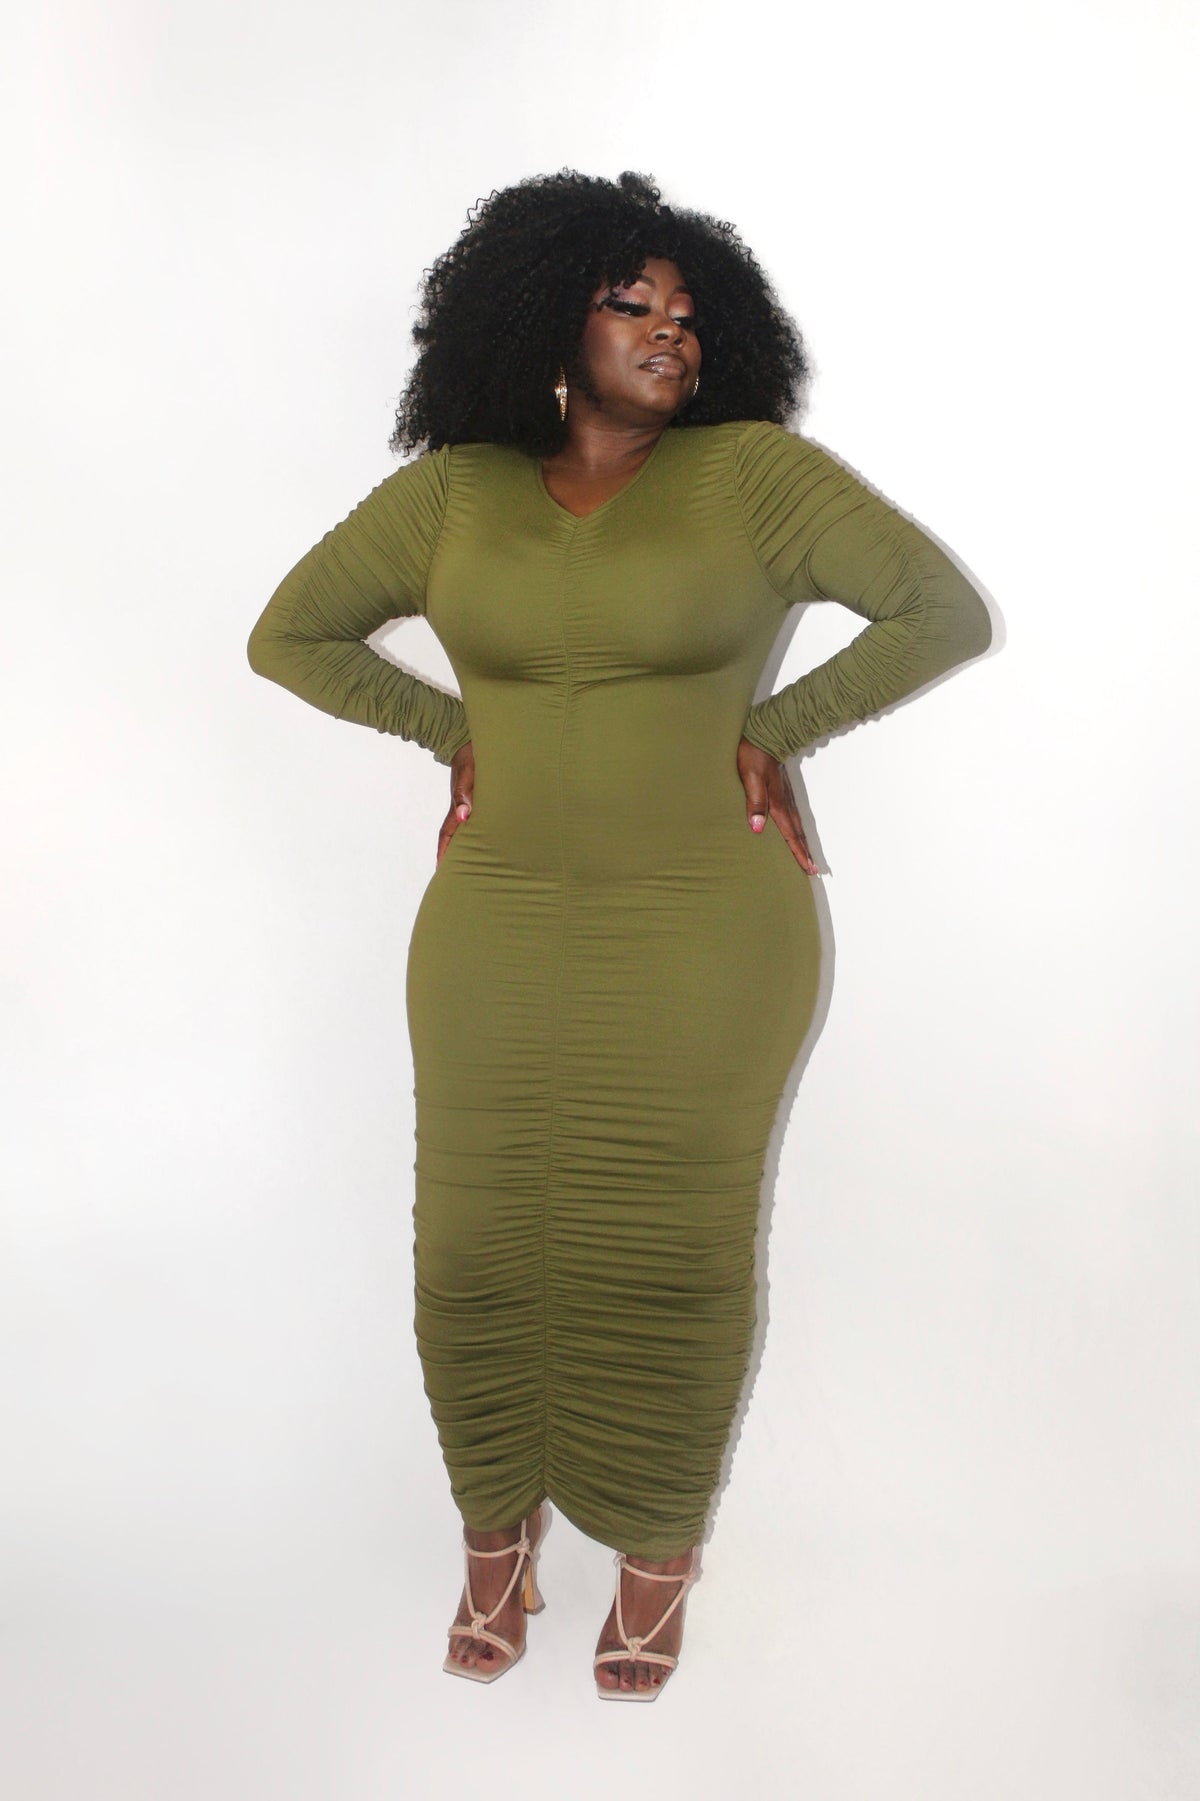 It's Giving Curves Dress